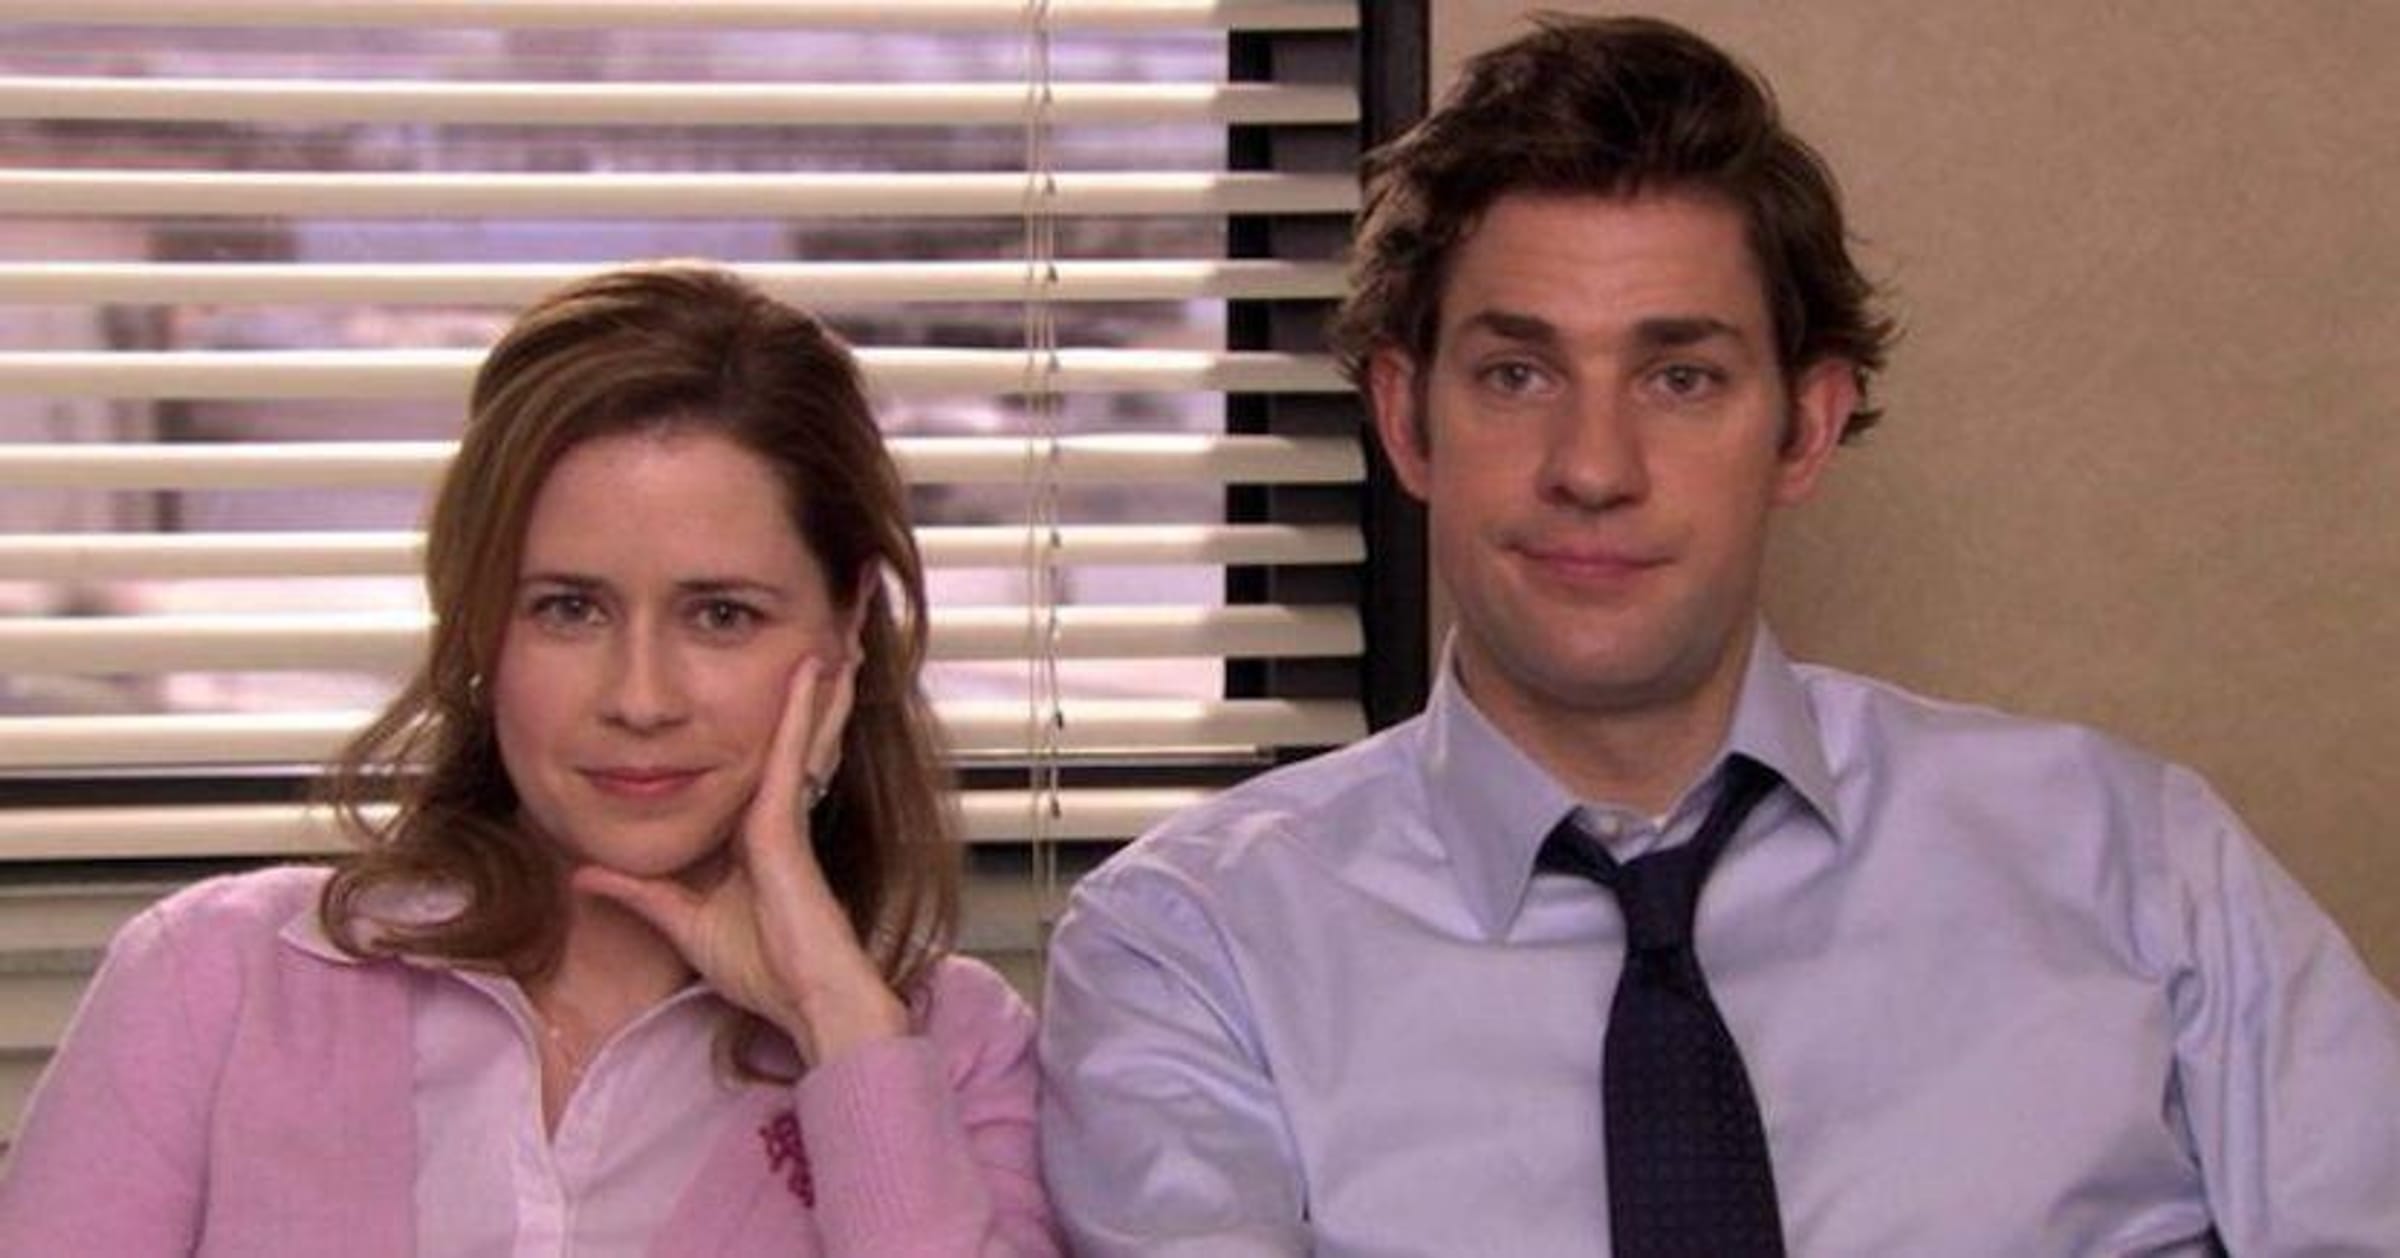 Jenna Fischer explains why Pam and Roy were engaged for so long on